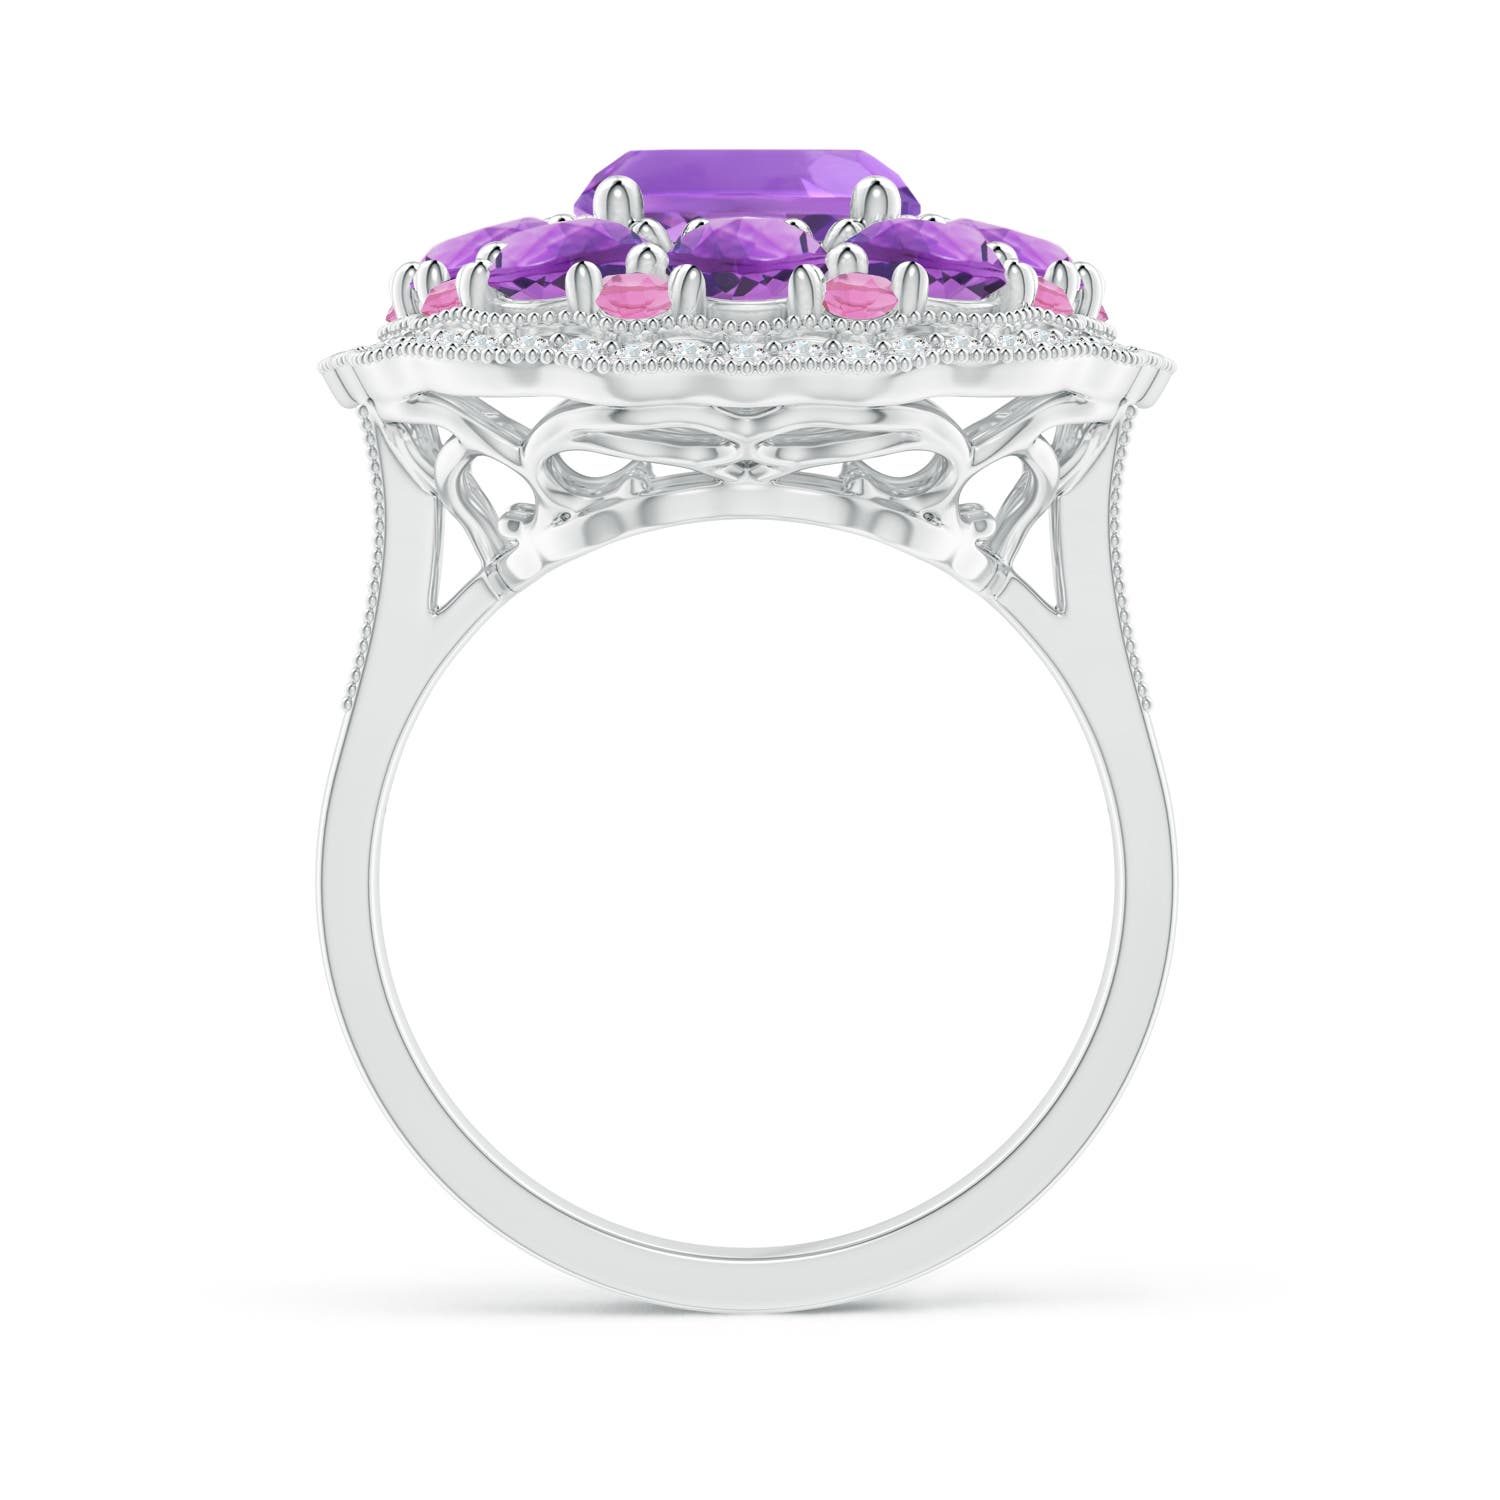 AA - Amethyst / 5.85 CT / 14 KT White Gold